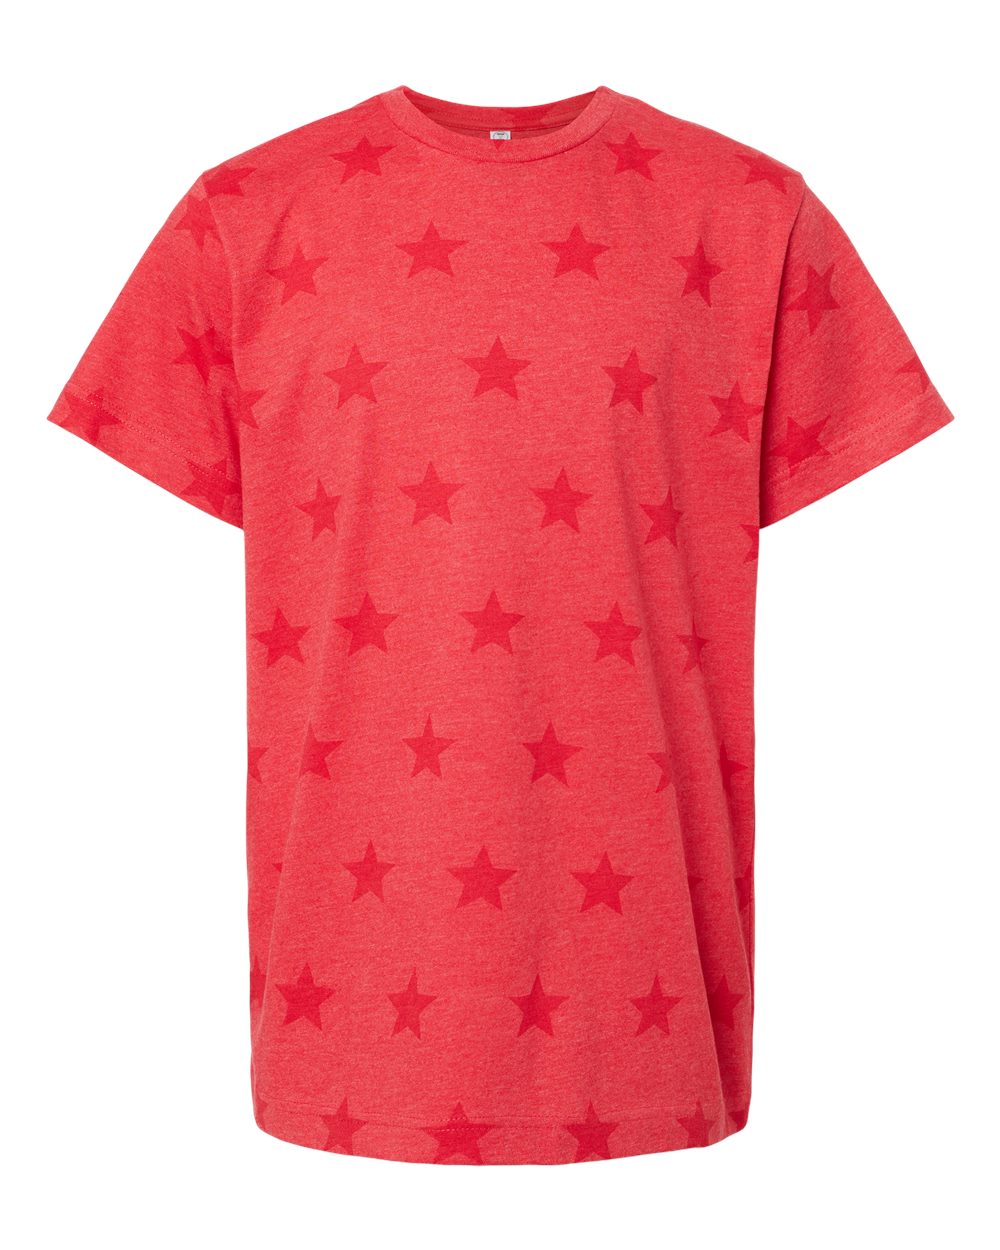 Code Five 2229 Youth Tee - Red Star